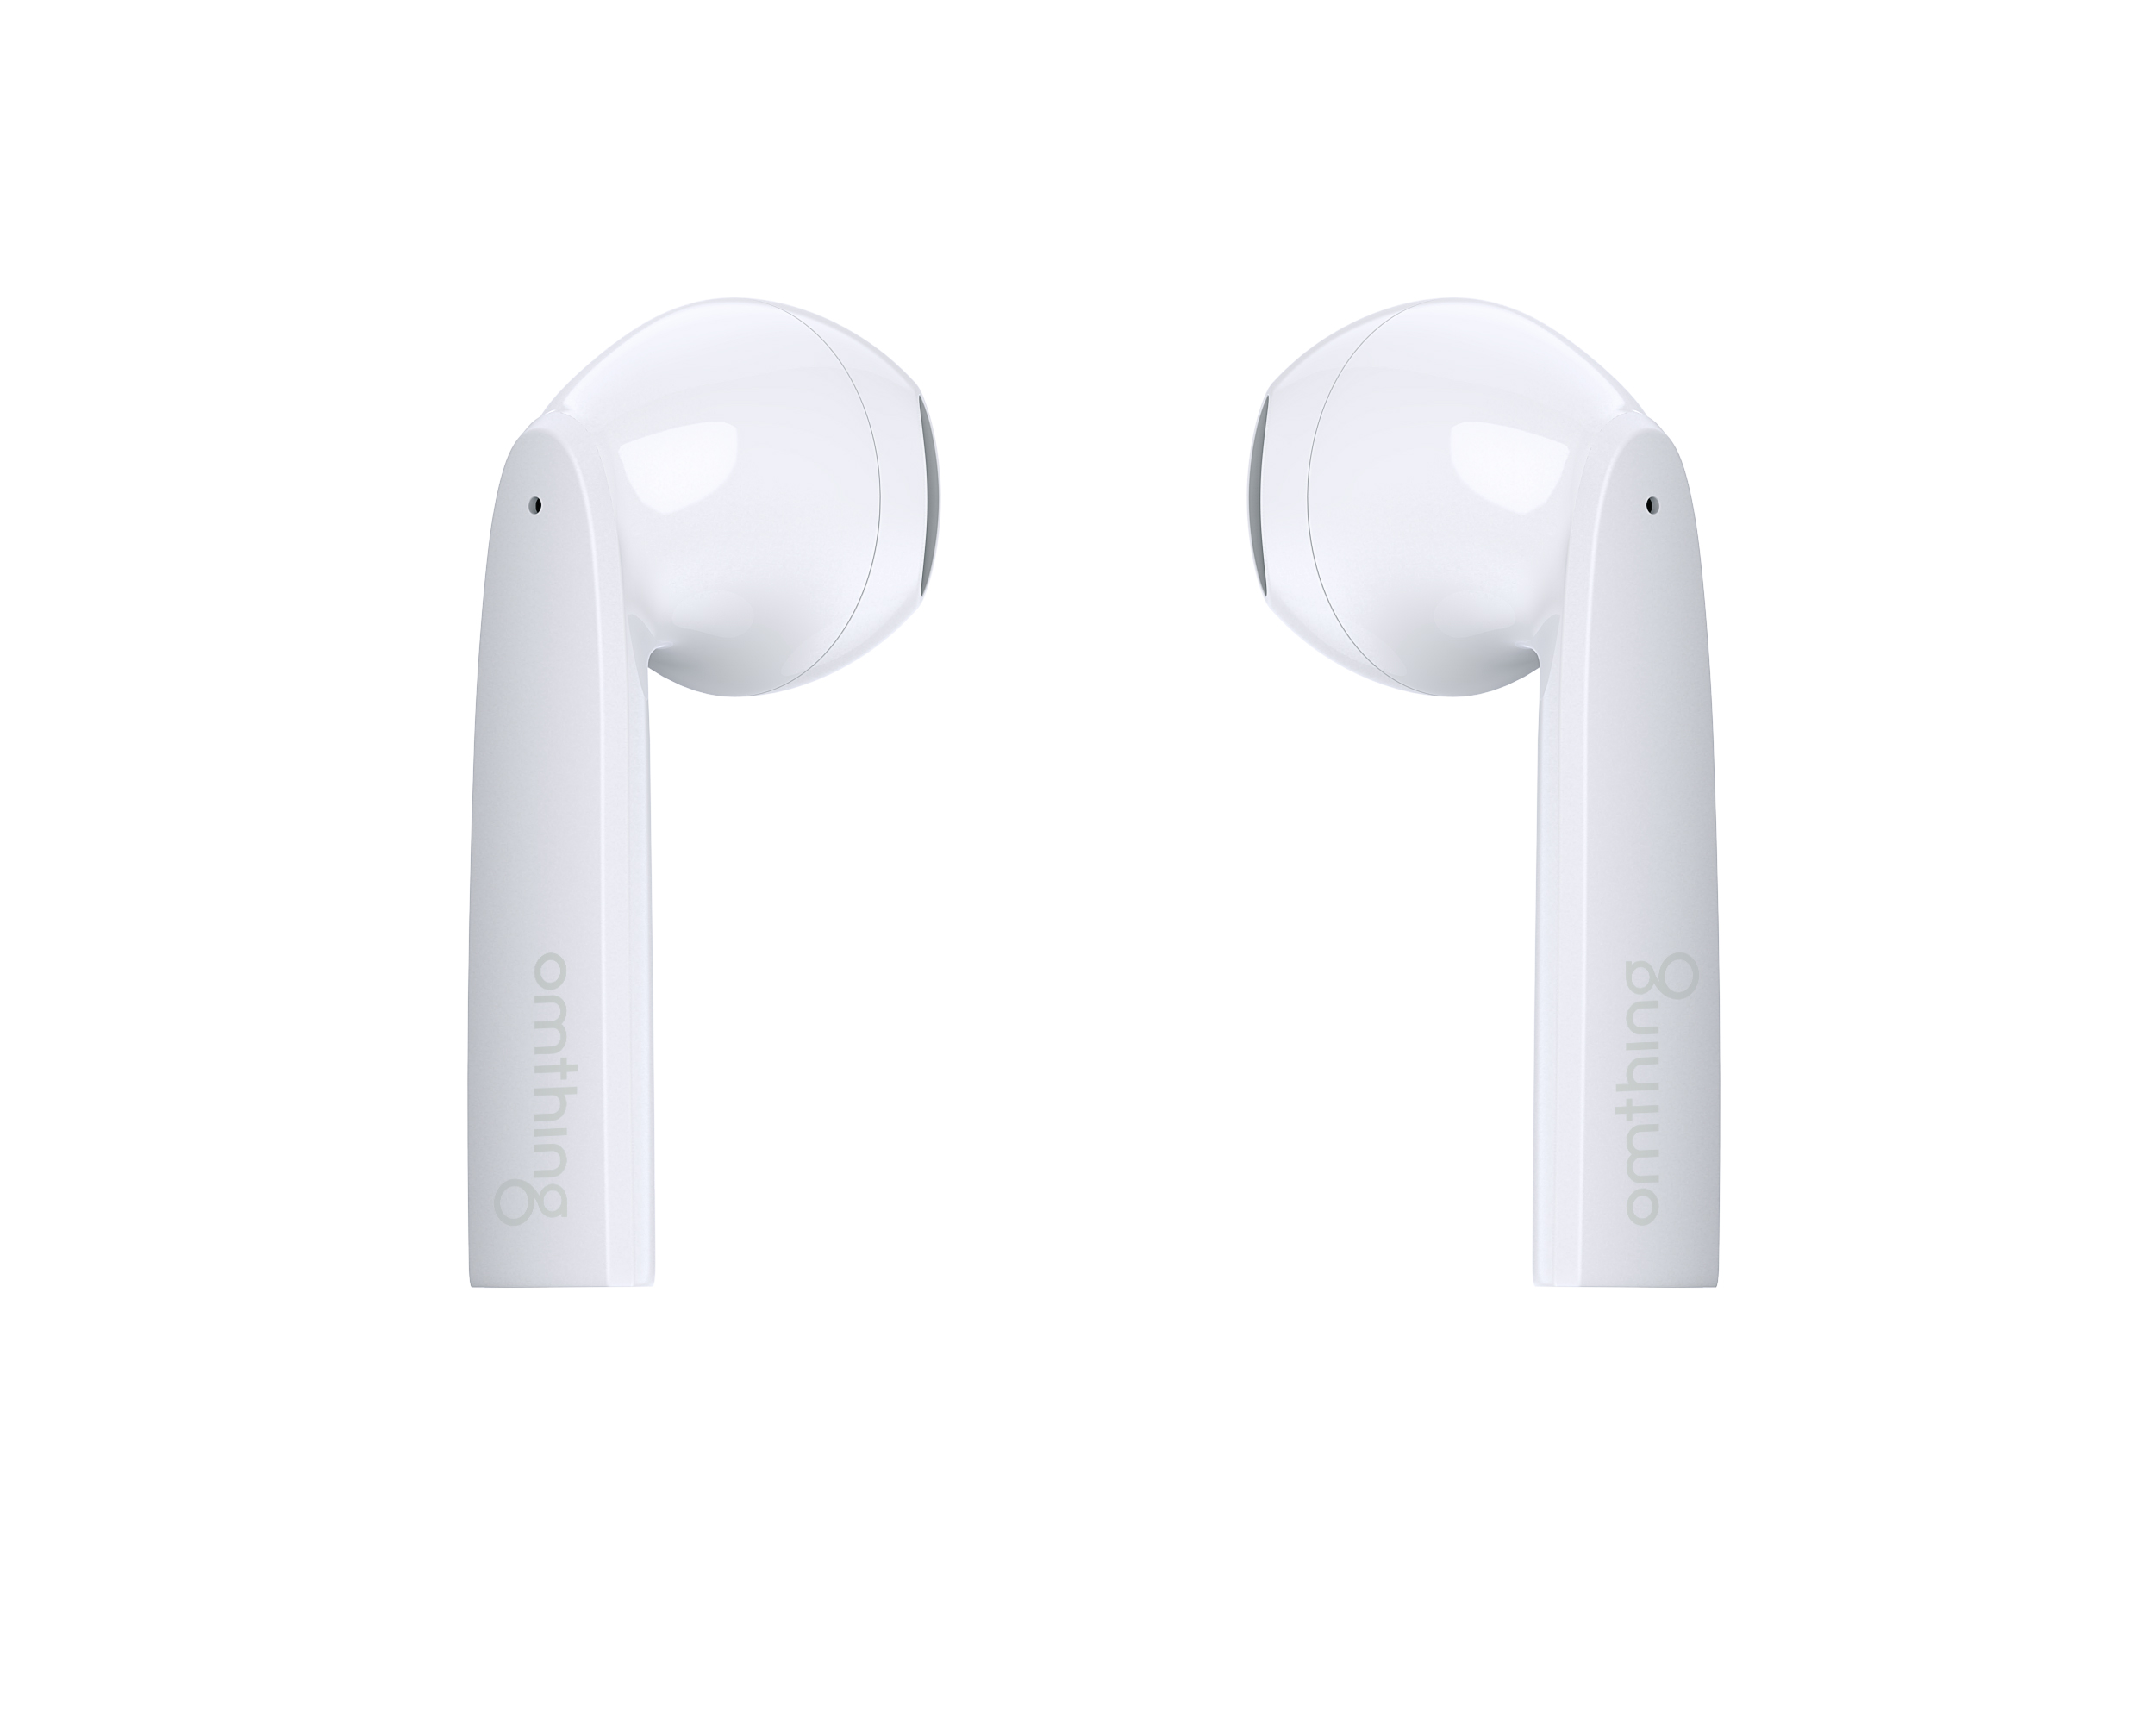 1MORE Omthing AirFree Pods True Wireless